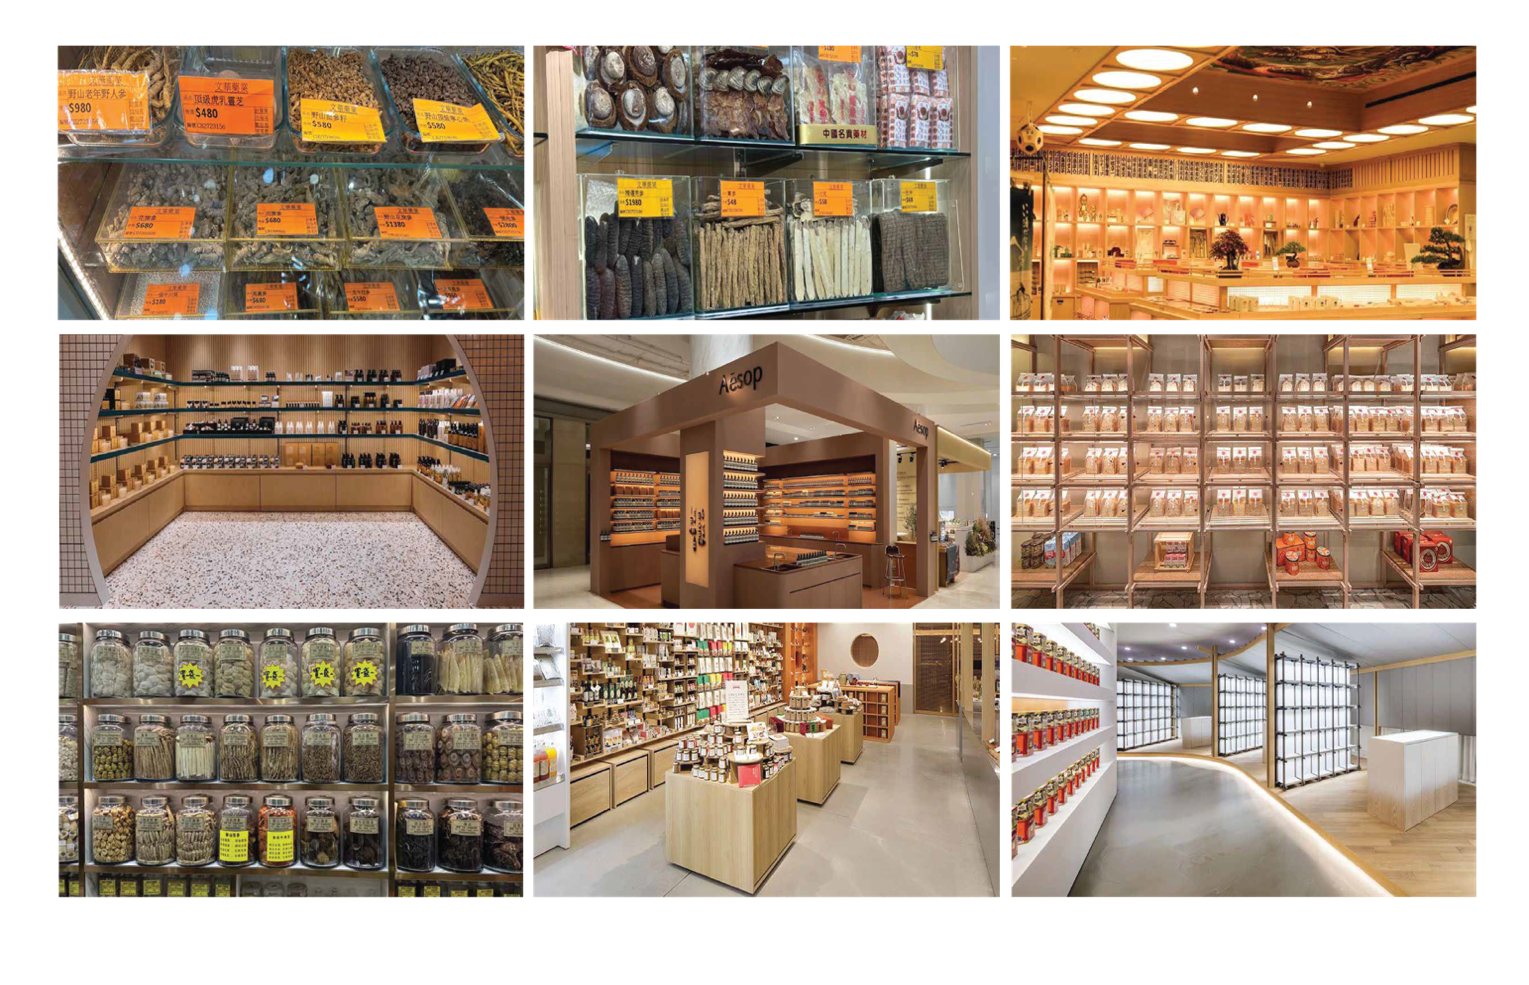 A collage of different products

Description automatically generated